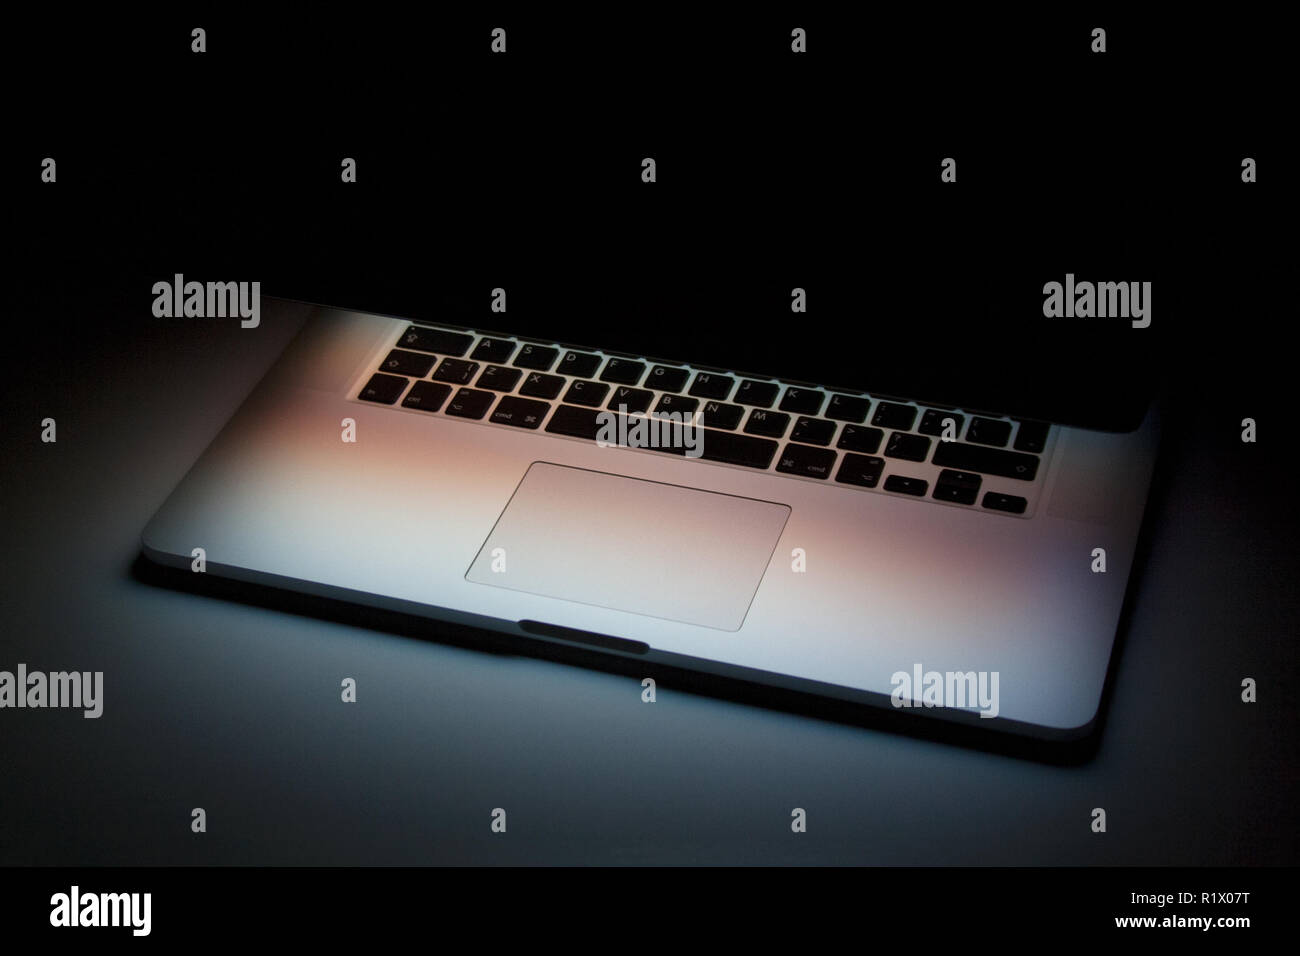 Half closed silver laptop with screen light isolated on dark background Stock Photo